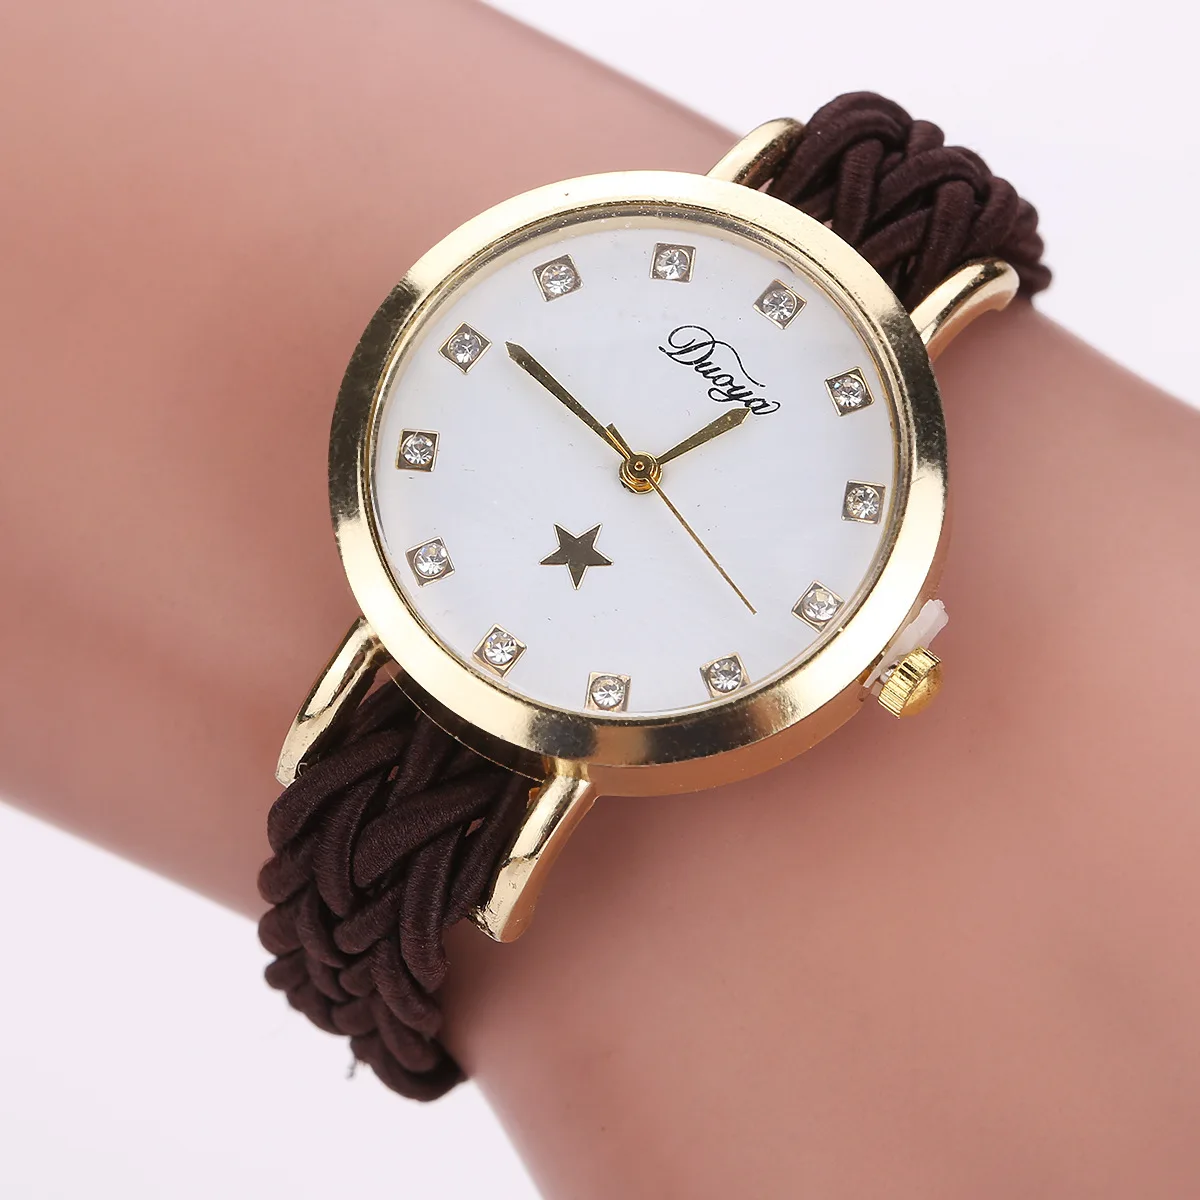 

Ladies PU Bracelet Table Personalized Lades Dress Wristwatches Women Watch Braided Rope Rubber Band Female Watches Reloj Muje